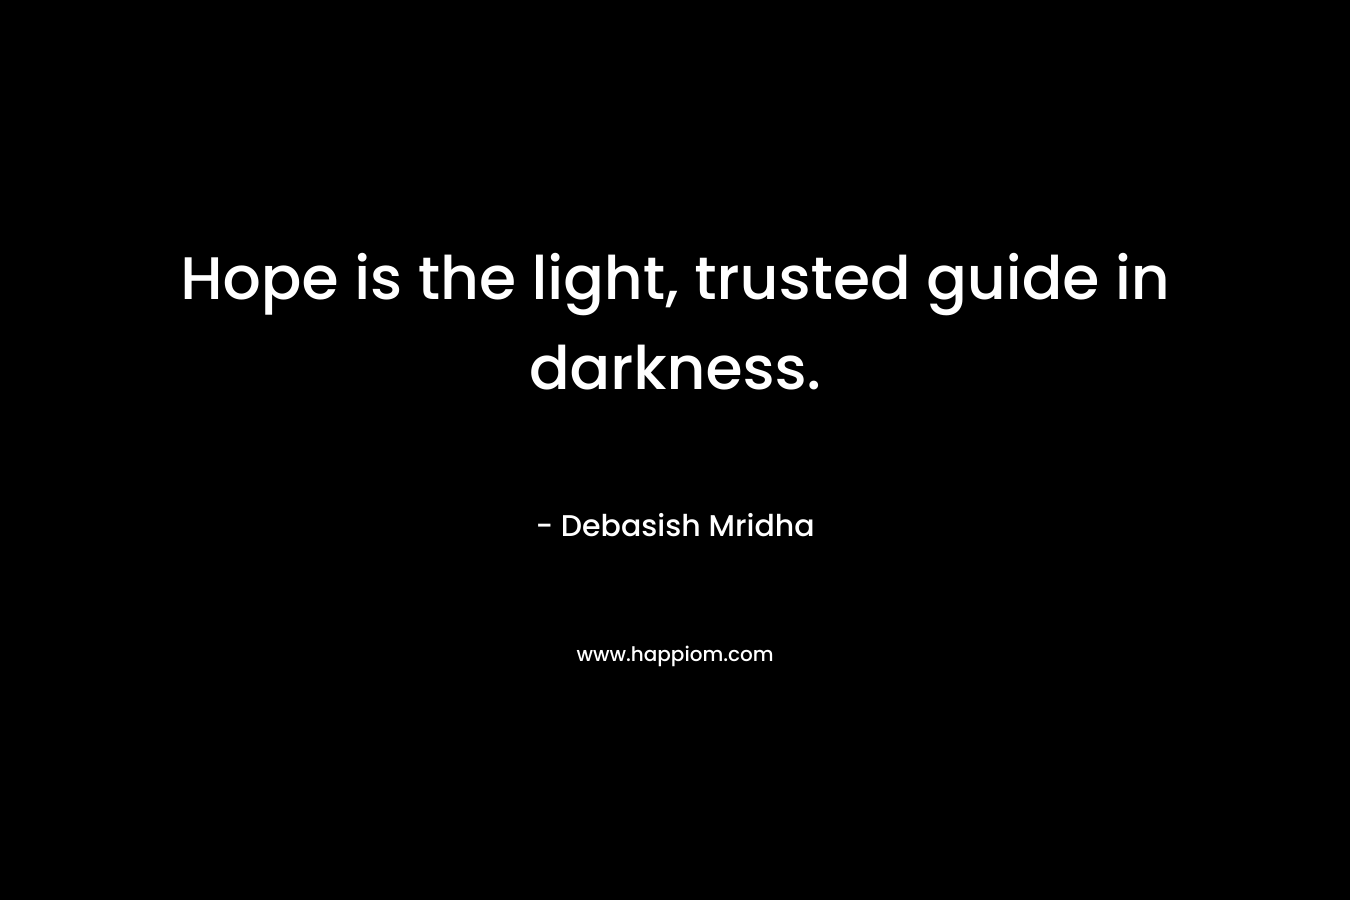 Hope is the light, trusted guide in darkness.